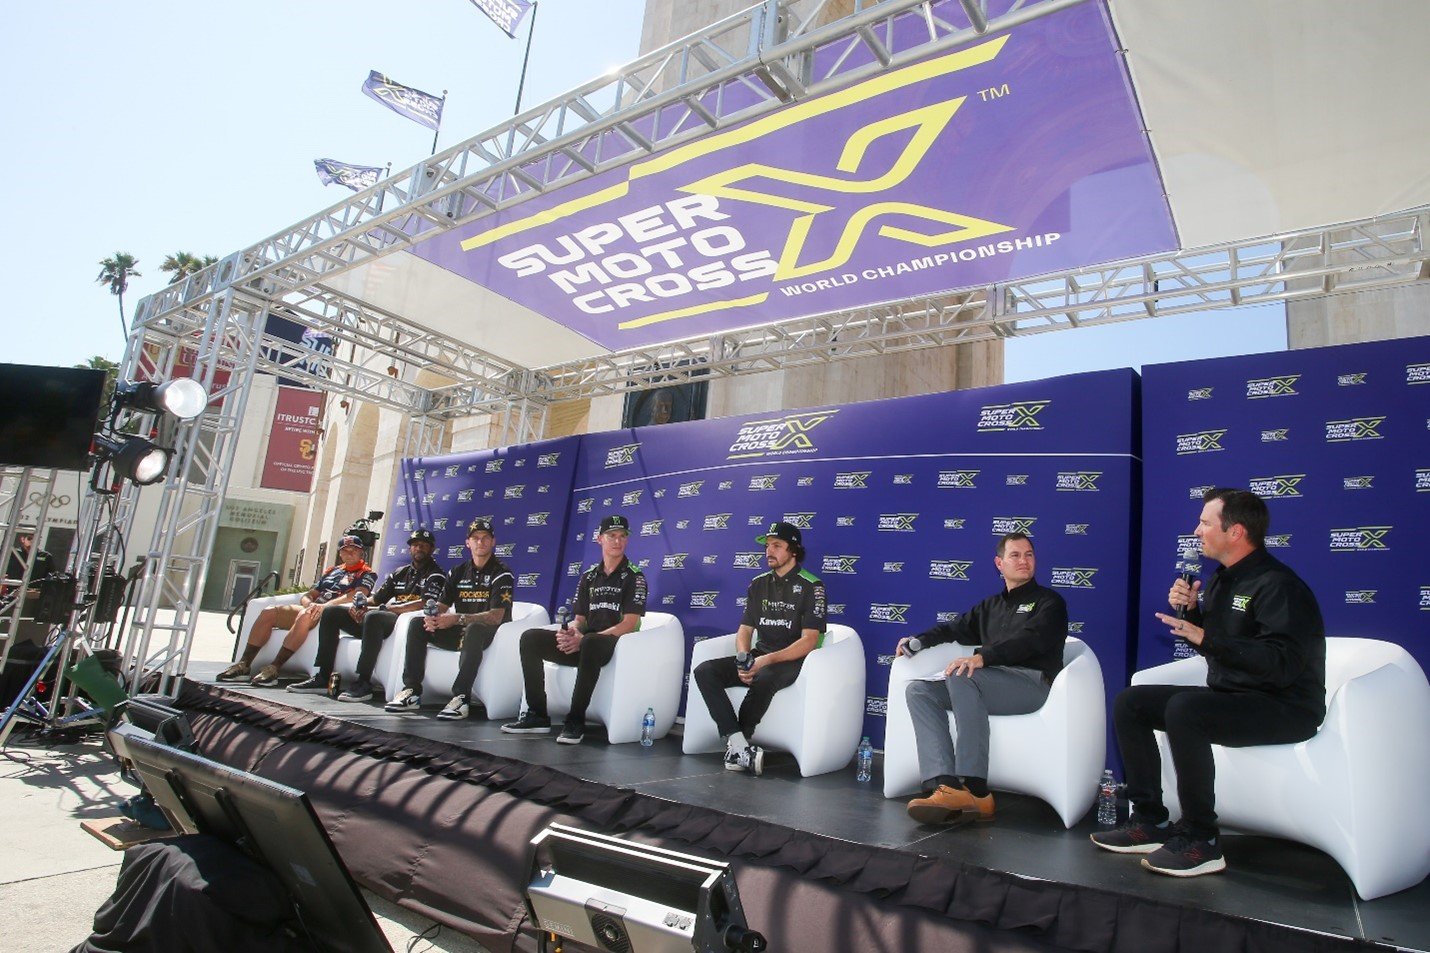 Elite Racers Cooper Webb, Malcolm Stewart, Christian Craig, Adam Cianciarulo, and Jason Anderson speaking with hosts Jason Weigandt and Daniel Blair at the SuperMotocross World Championship press event staged at the Los Angeles Memorial Coliseum in Los Angeles. (Photo Credit: Feld Motor Sports)